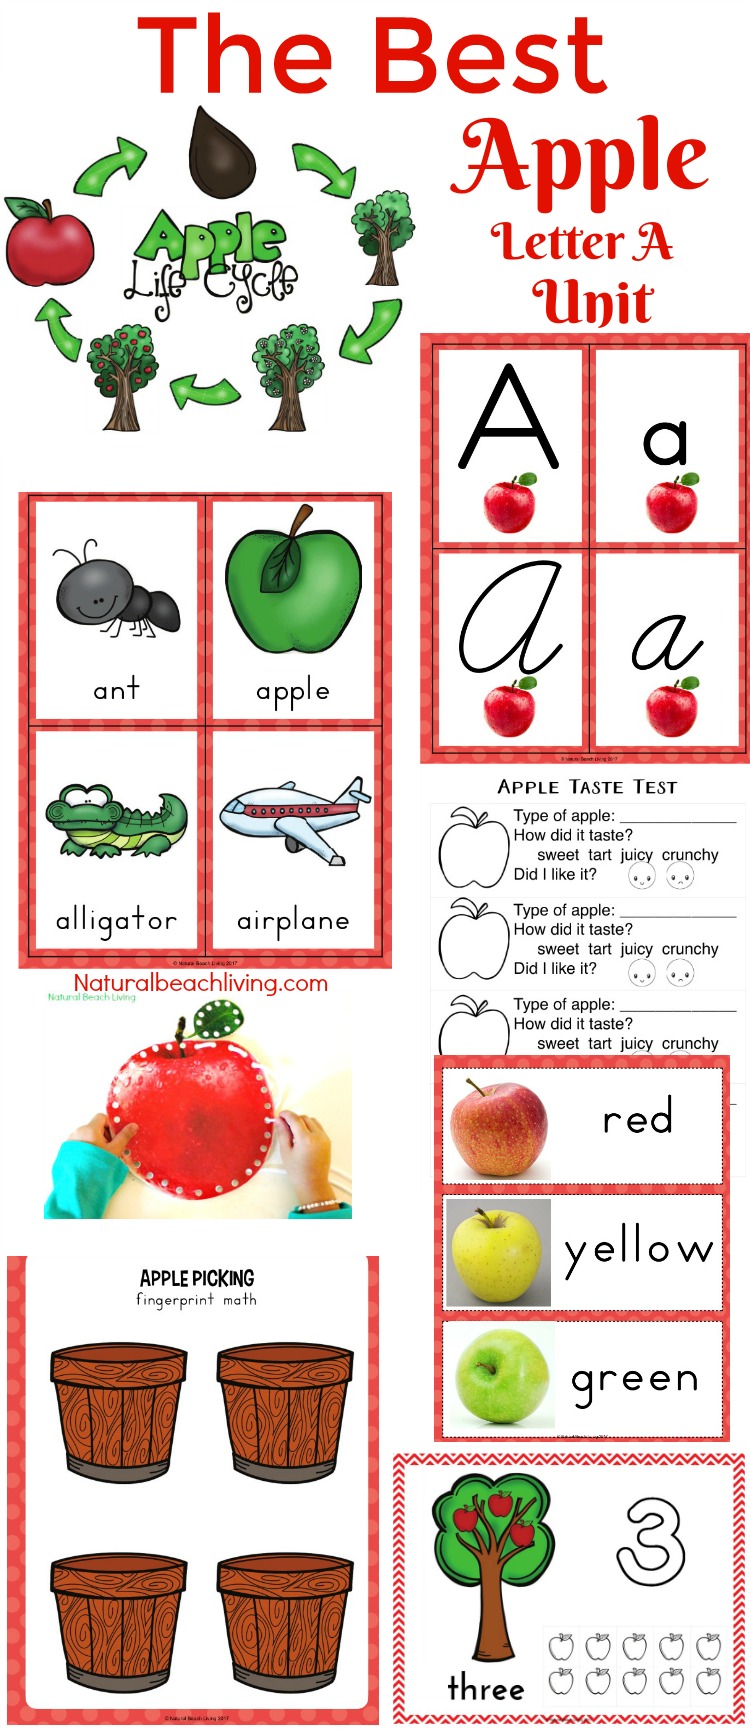 Preschool Apple Theme Activities and Lesson Plans, Fall Preschool Themes, Apple Stamping and Apple Activities for preschool and Kindergarten, Apple Crafts, Apple Science, literacy, math, and Apple Slime and Apple Playdough sensory play ideas that are fun and educational. Apple Worksheets, Apple Stamping and more.